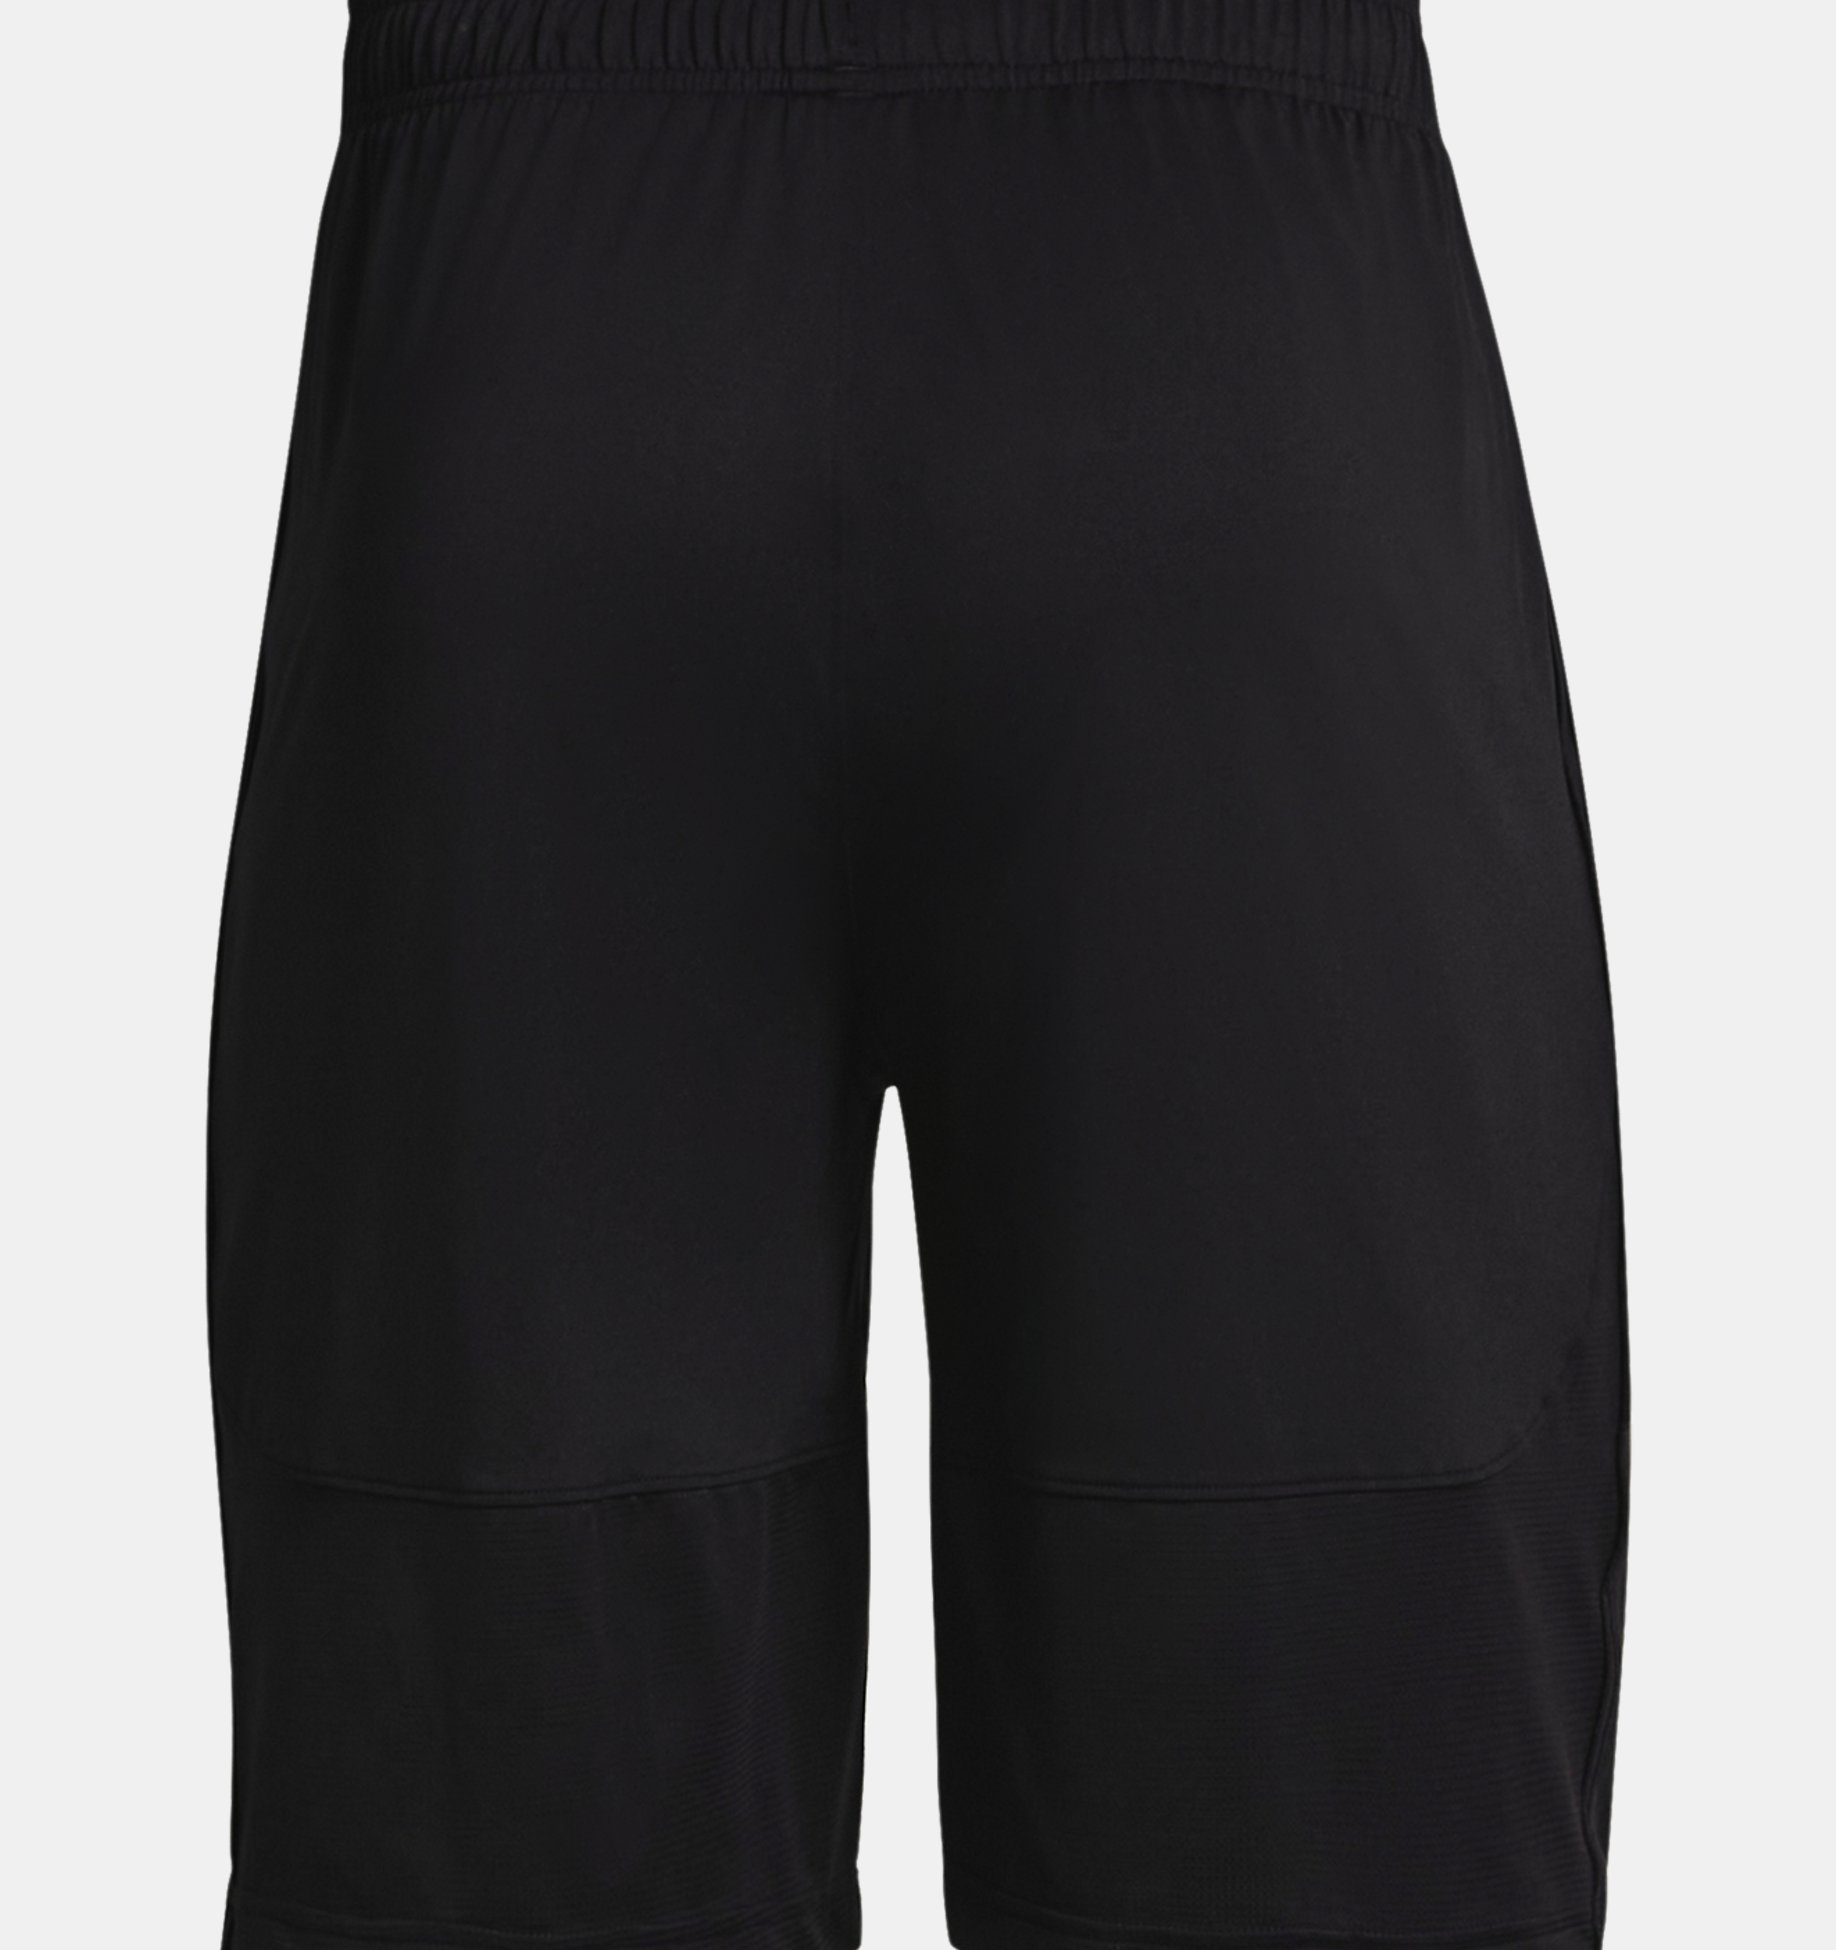 Under Armour Homme RAID Shorts/Training Shorts-Divers Styles 